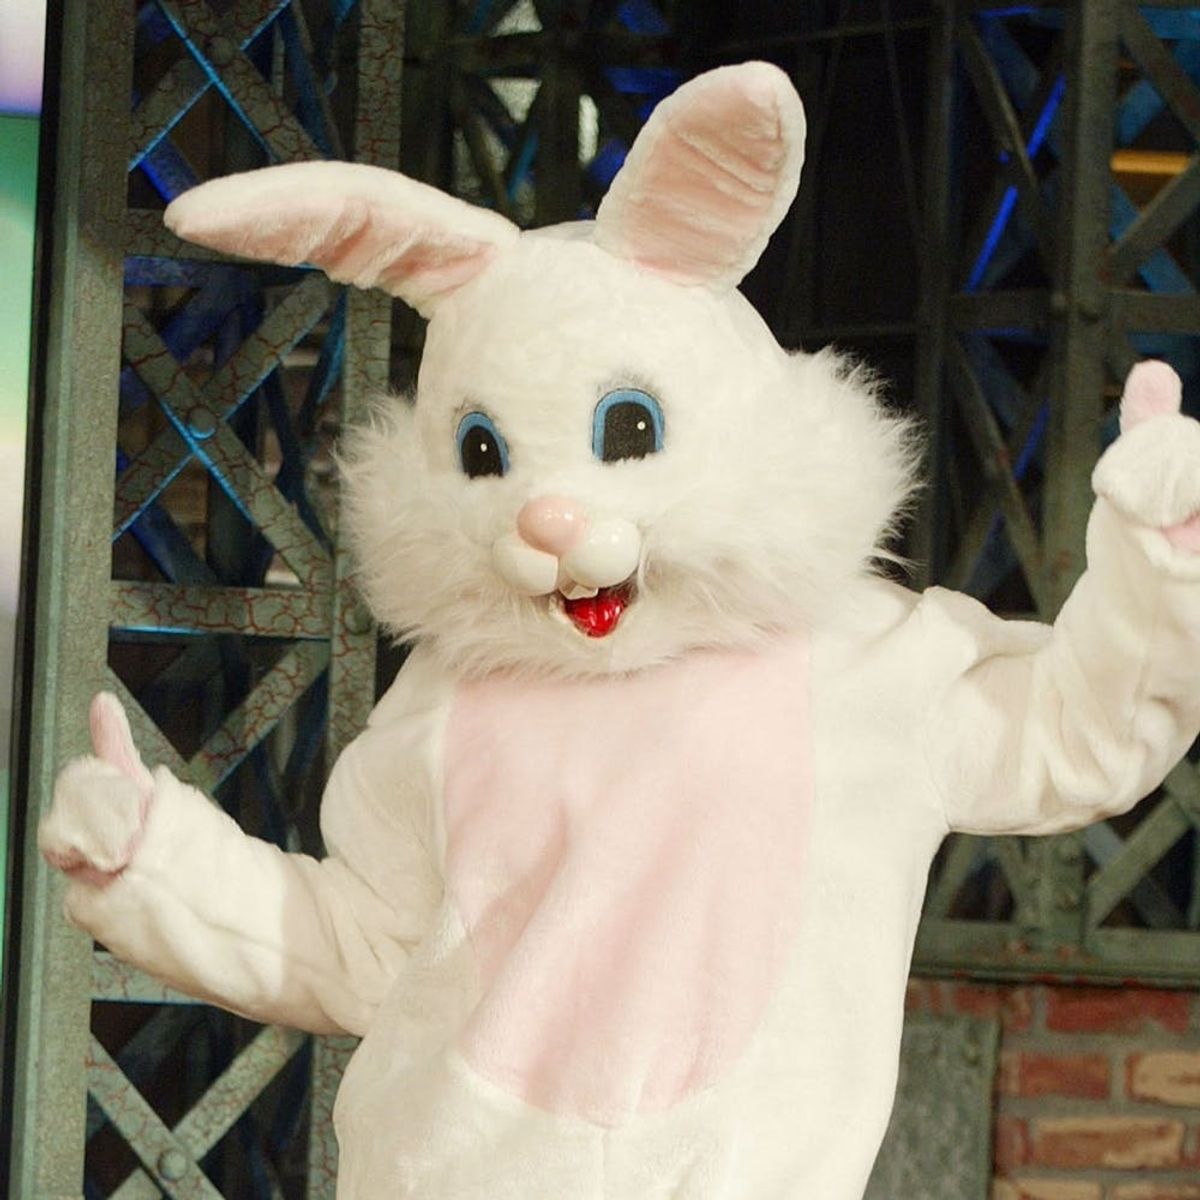 Chrissy Teigen’s Family Easter Bunny Photo Is So Cute, We Want to Hang It on Our Fridge